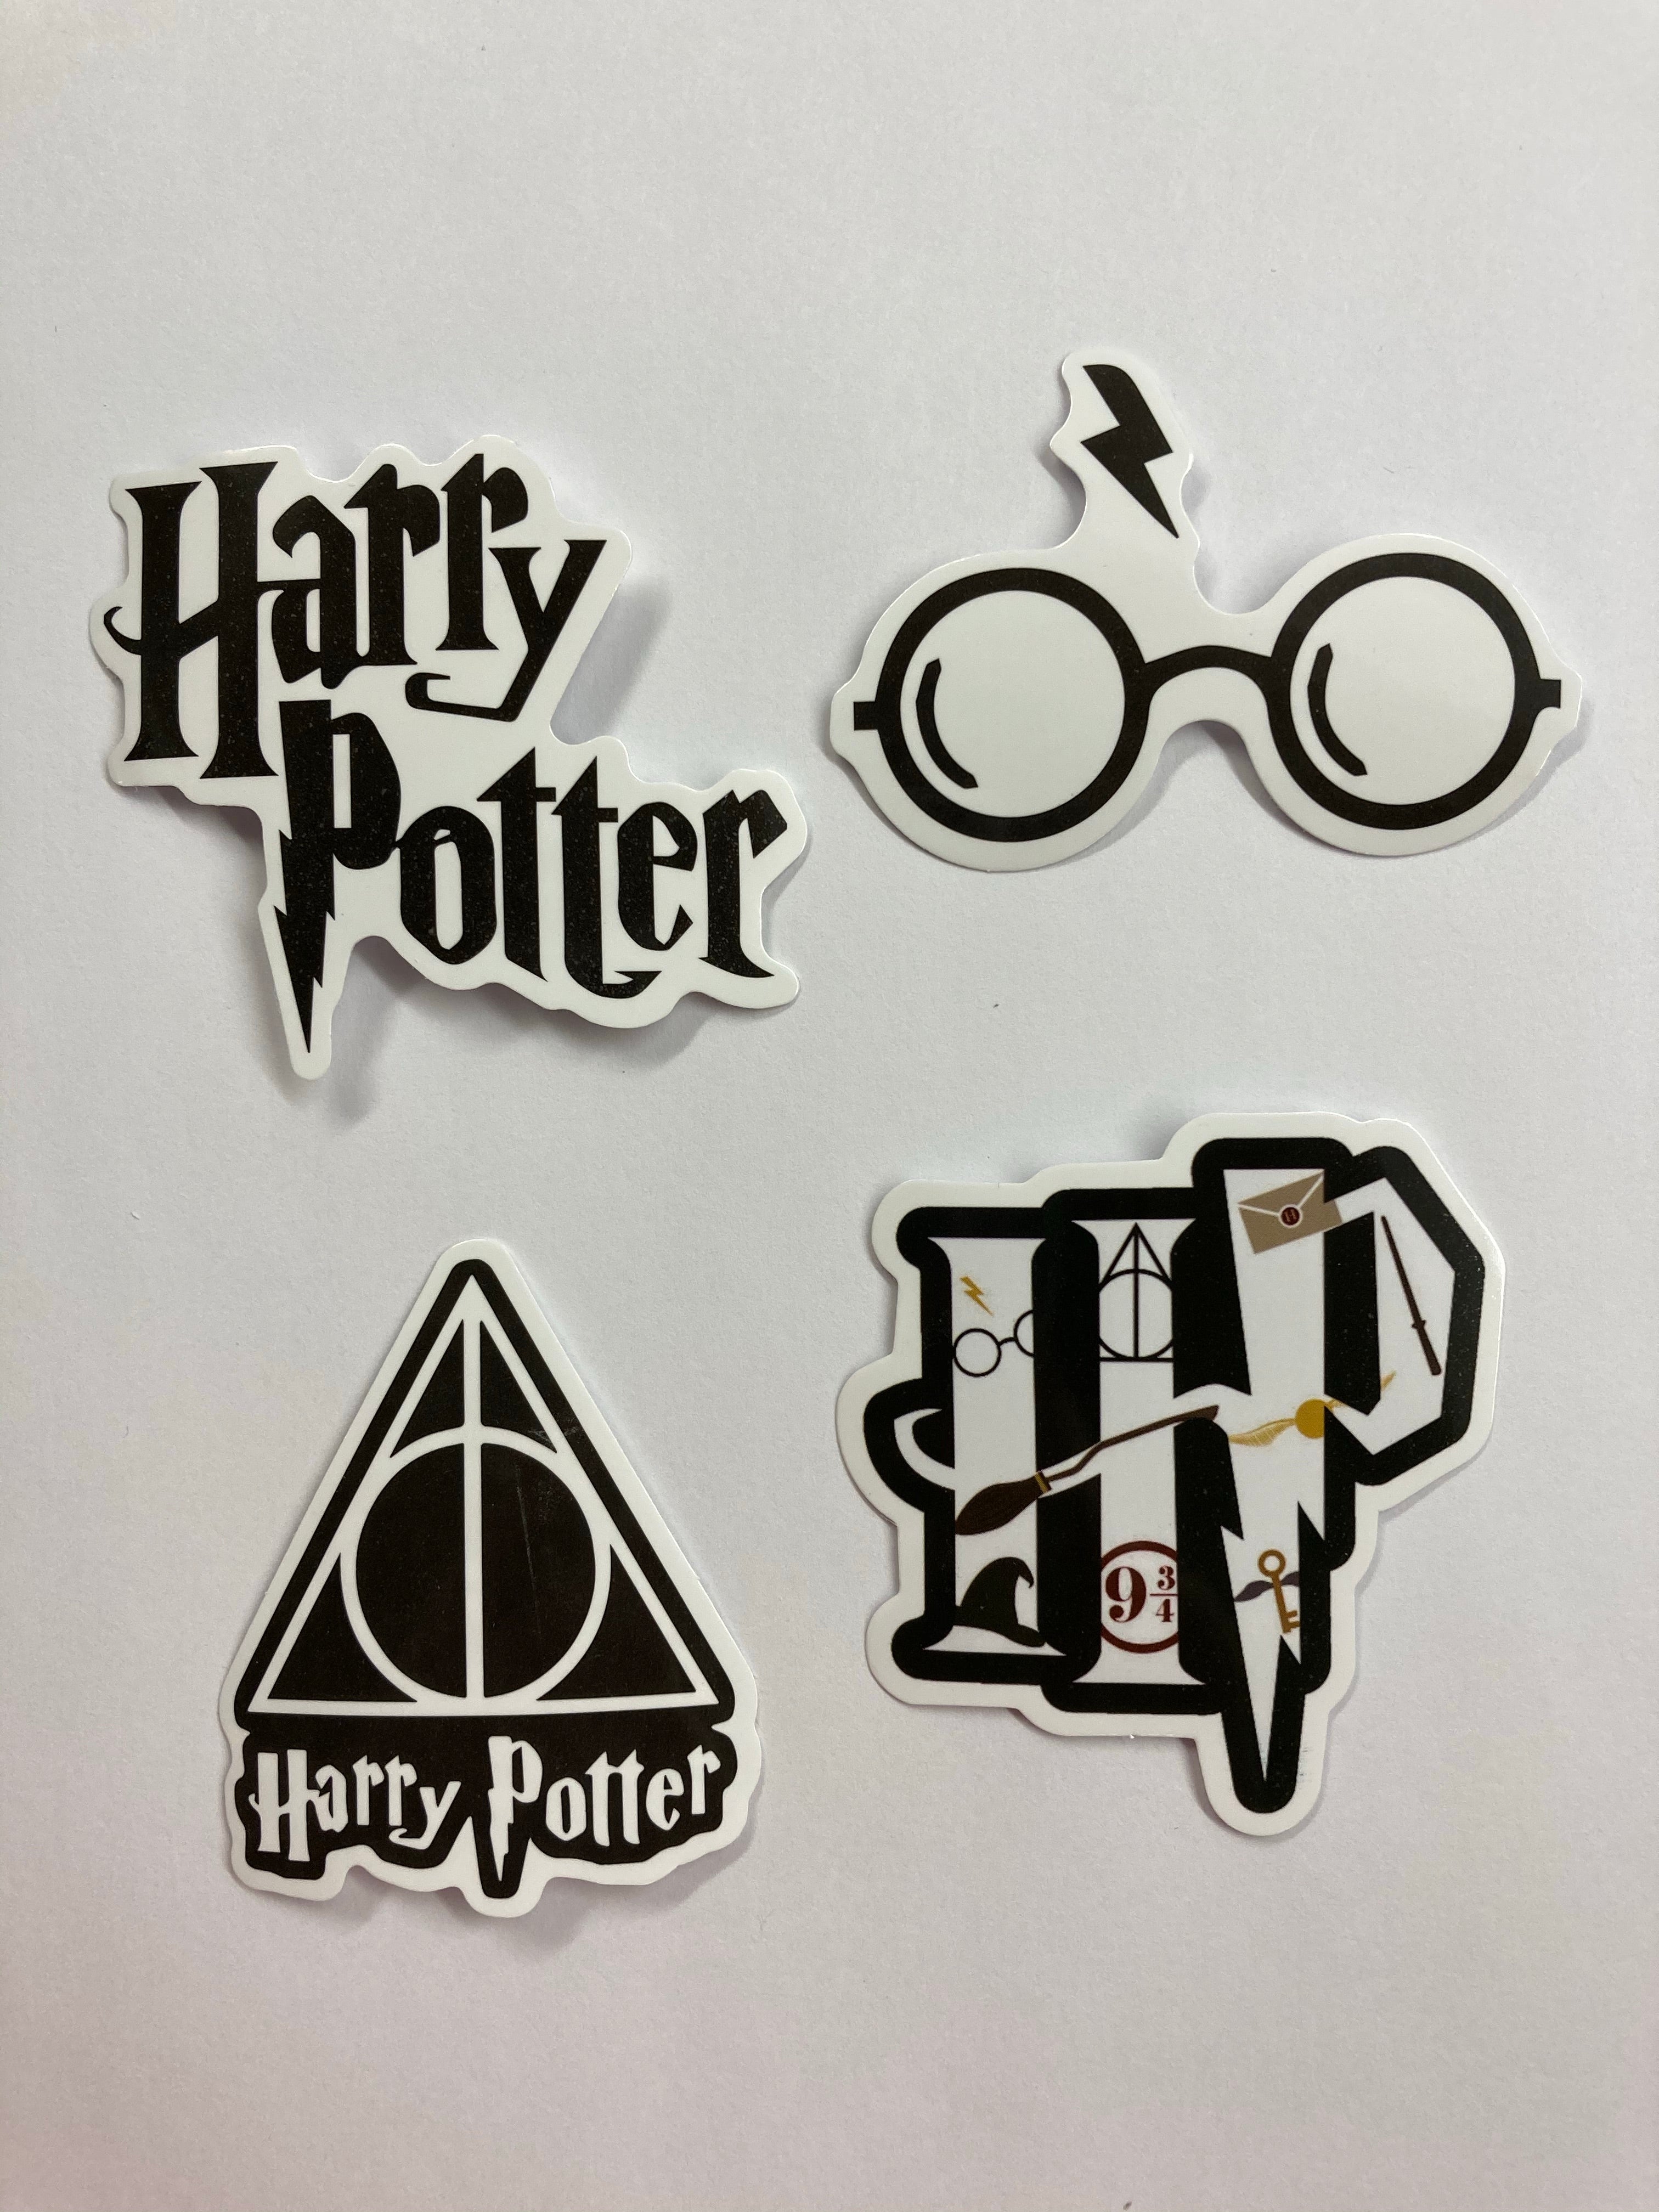 Harry Potter Black and White Waterproof Sticker Set 4 pieces